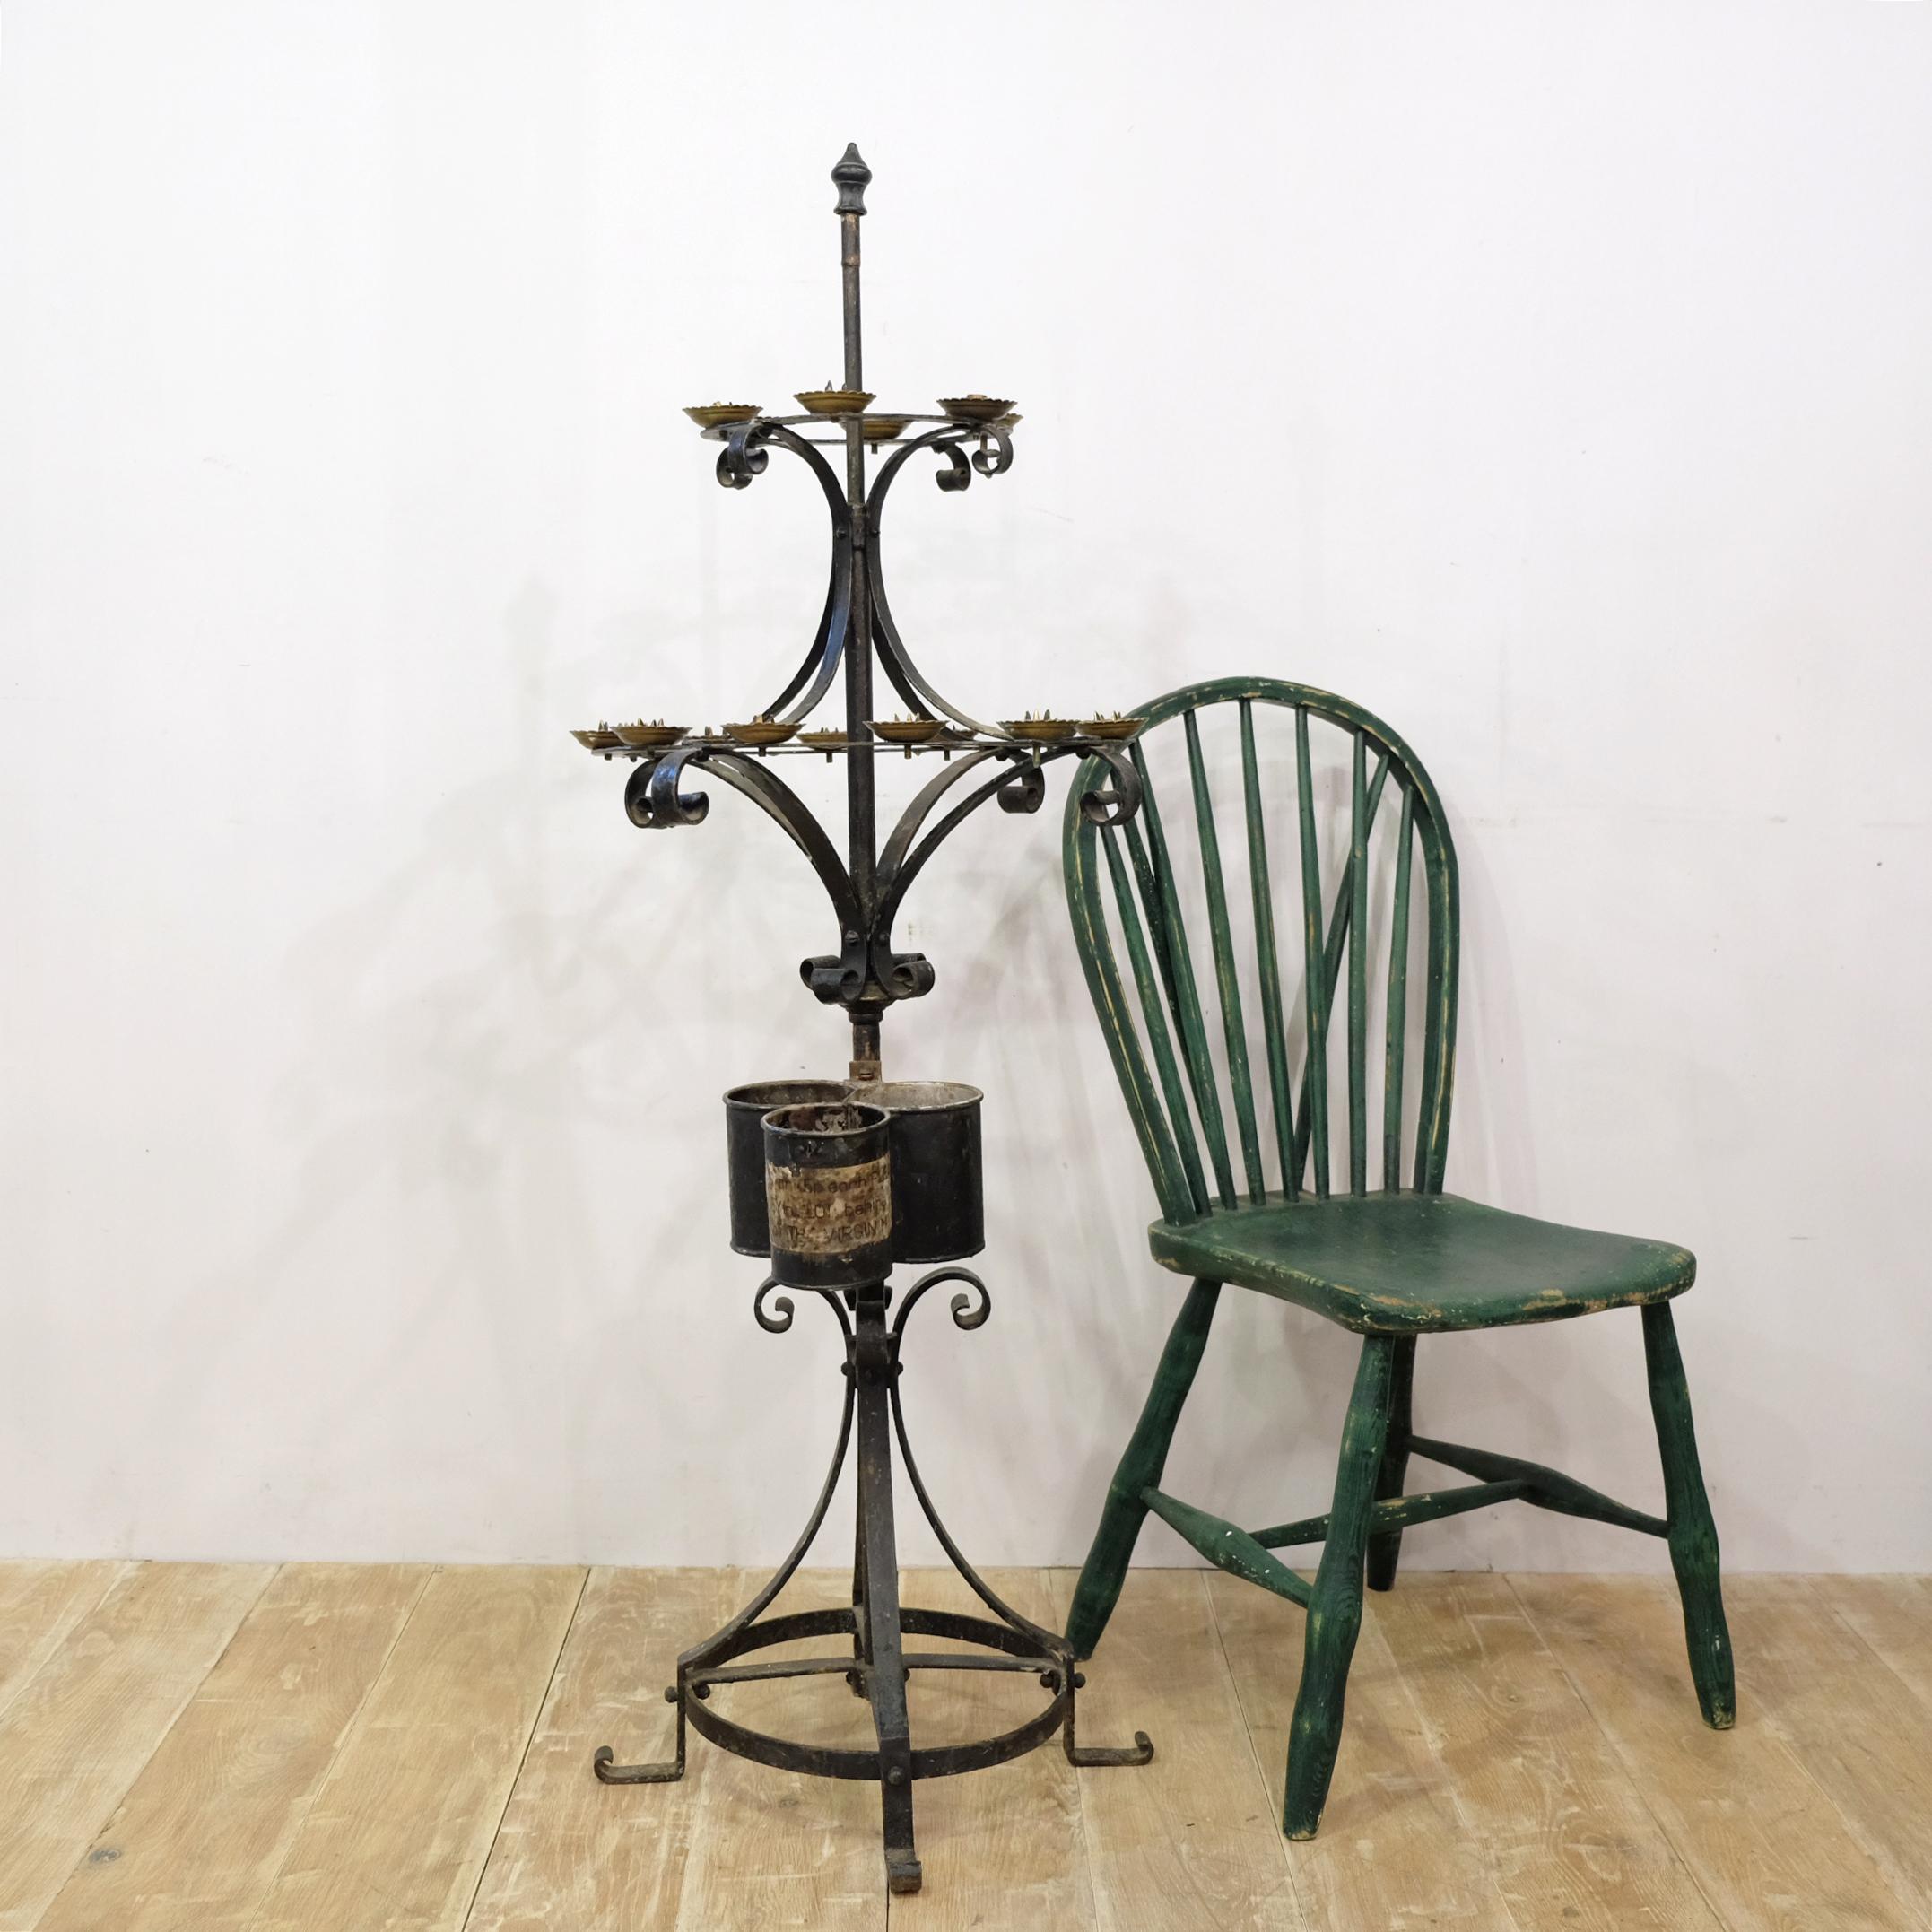 A large Victorian period wrought iron and brass votive stand. These are used in churches to hold candles that can be lit when offering a prayer. The lower section has three metal containers that would hold the unlit candles, one with a slightly